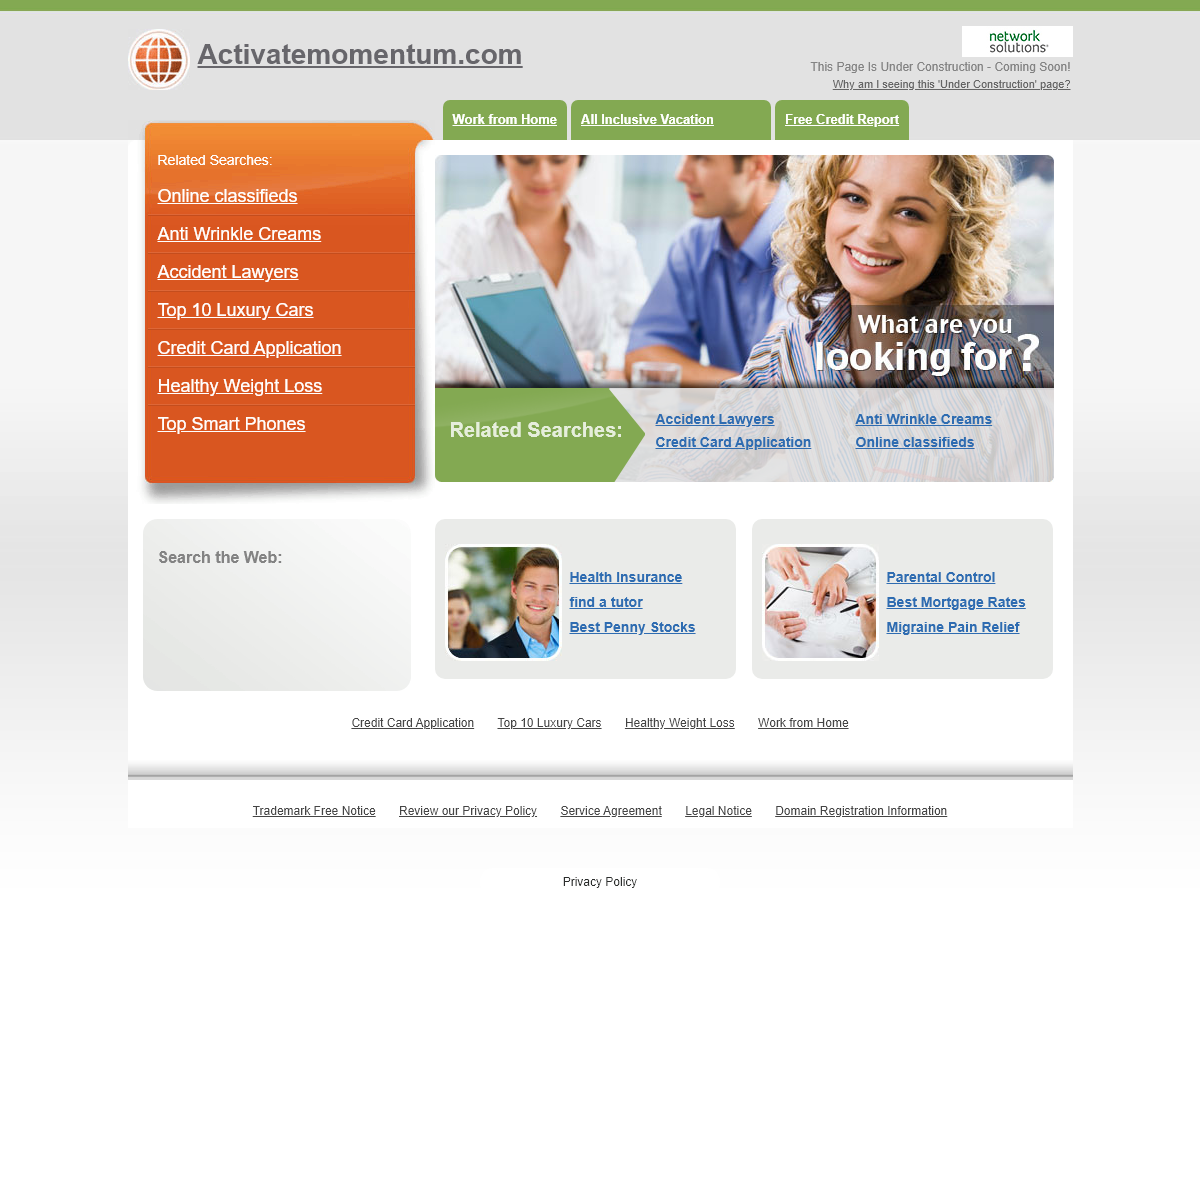 A complete backup of activatemomentum.com